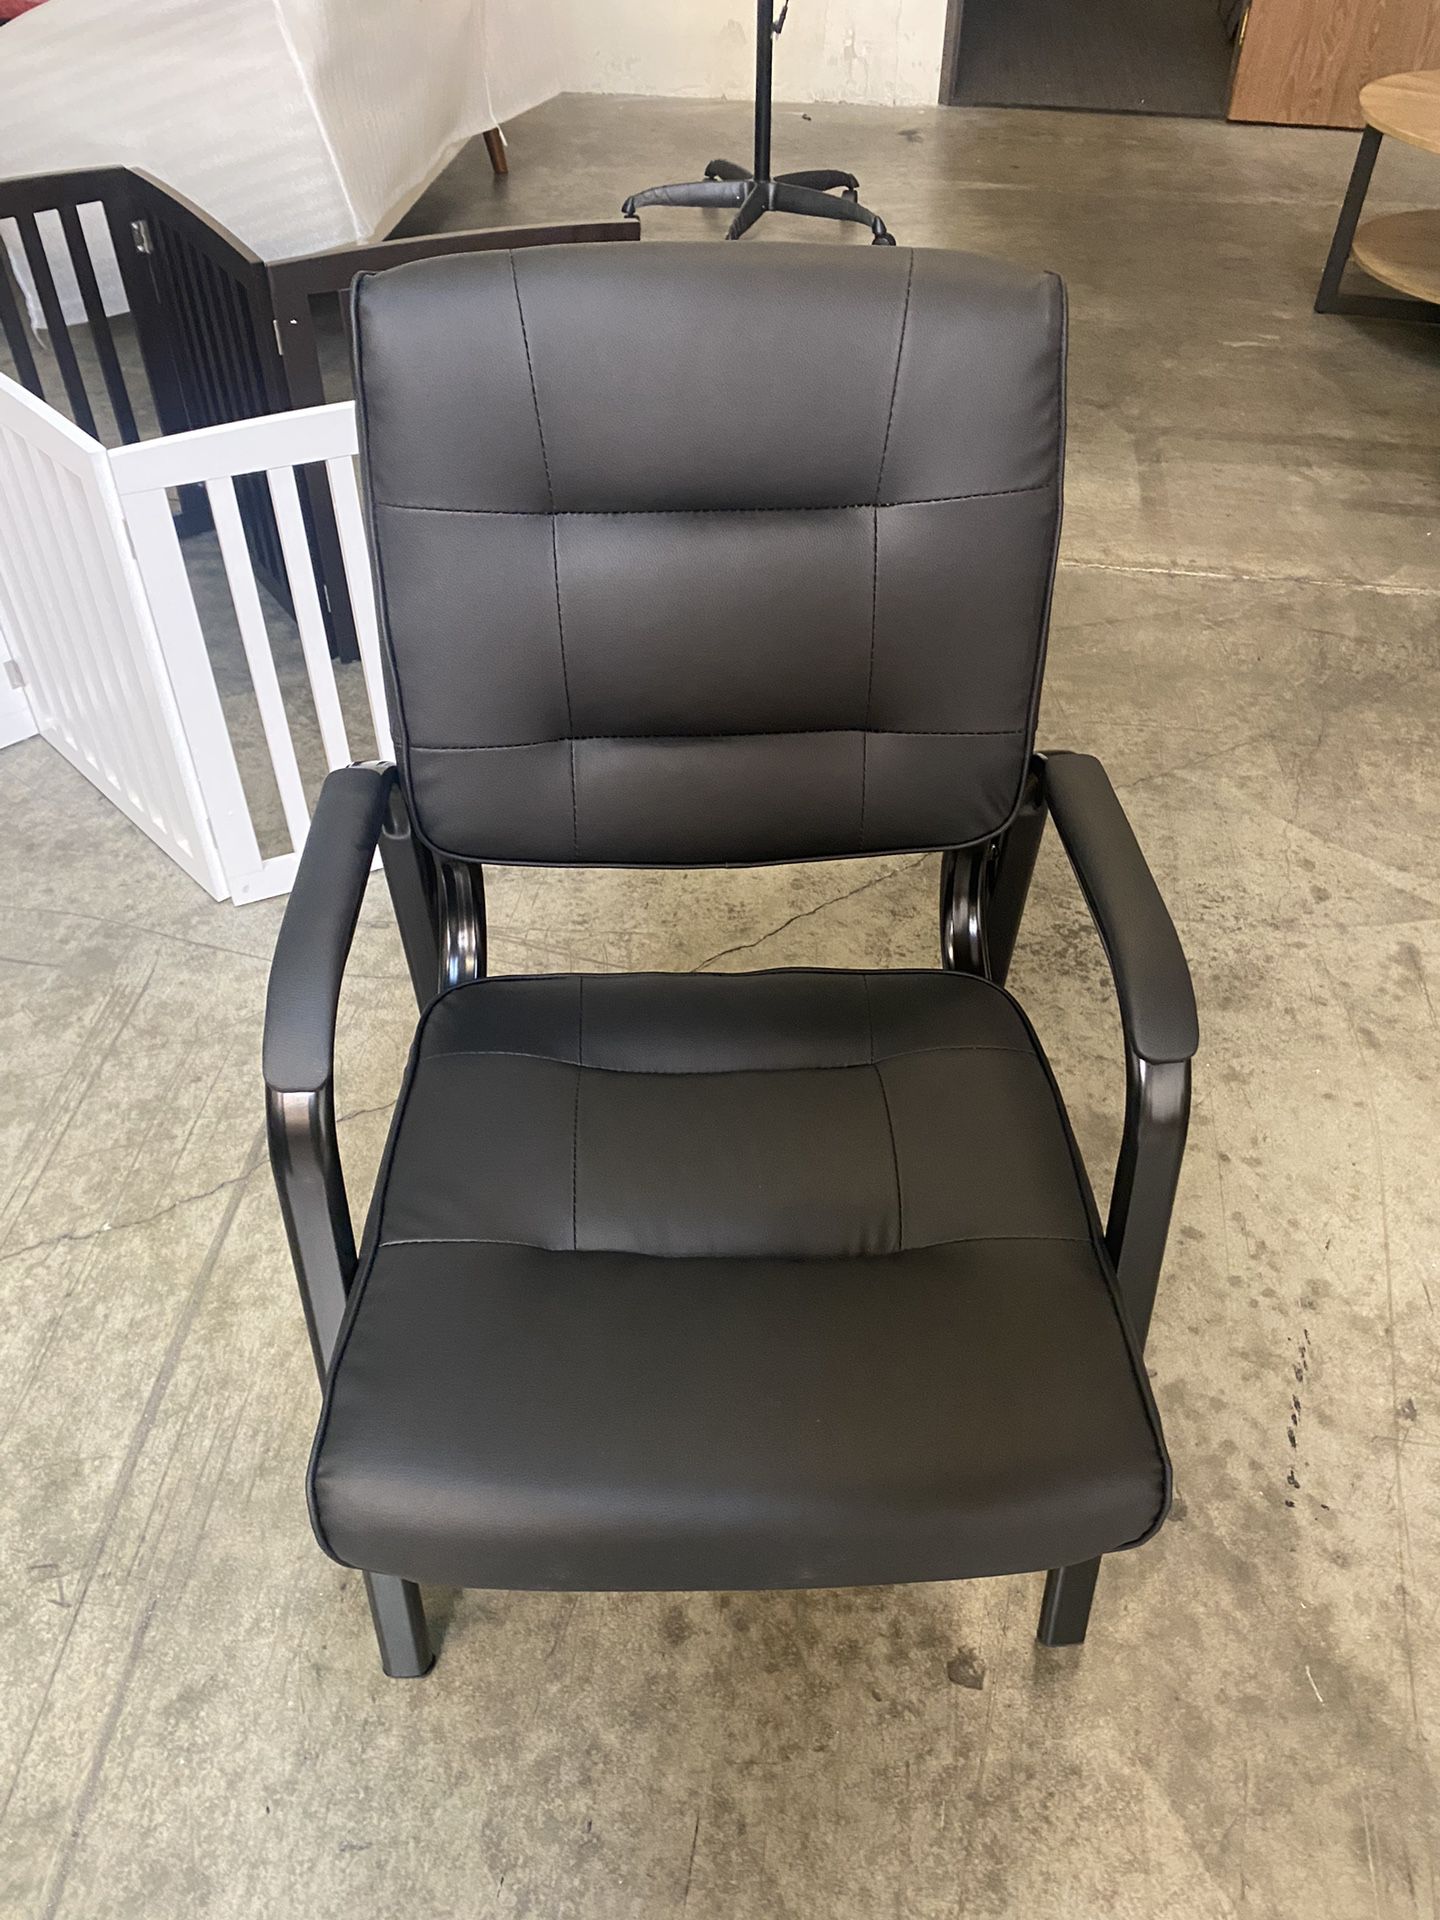 New Black PU Leather Office Office Chairs